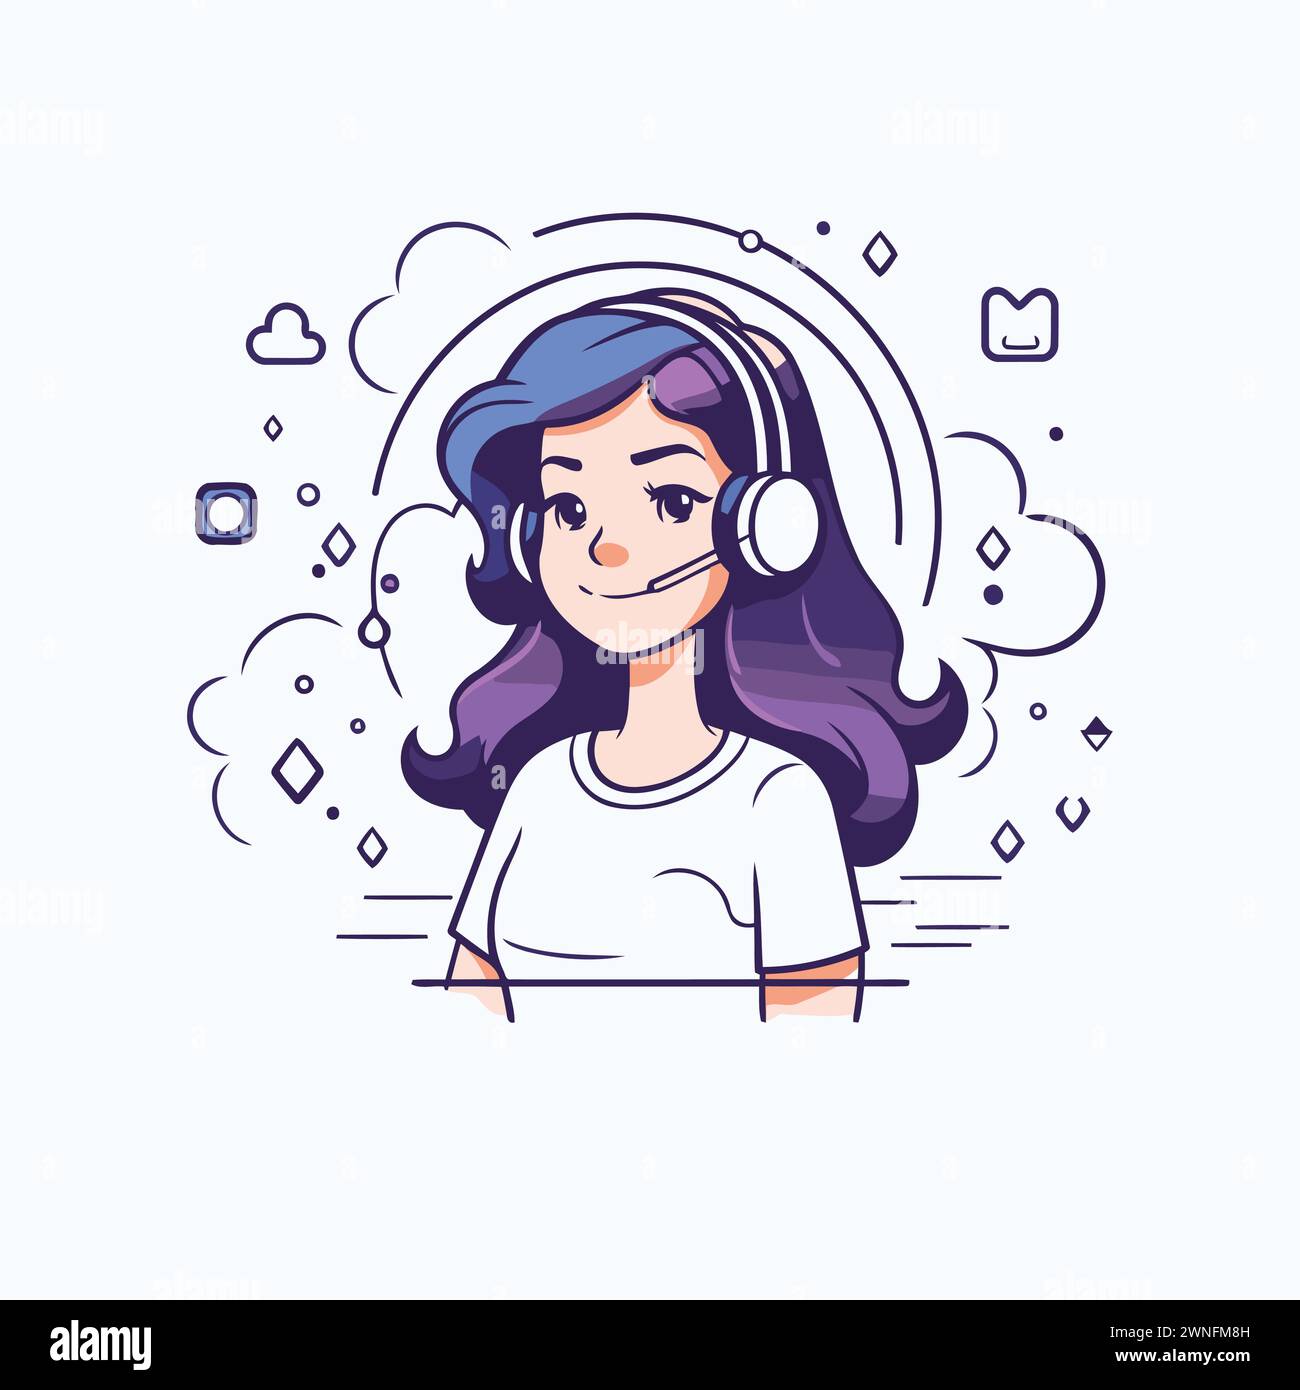 Vector illustration of a girl with headphones. Call center. customer support service. Stock Vector